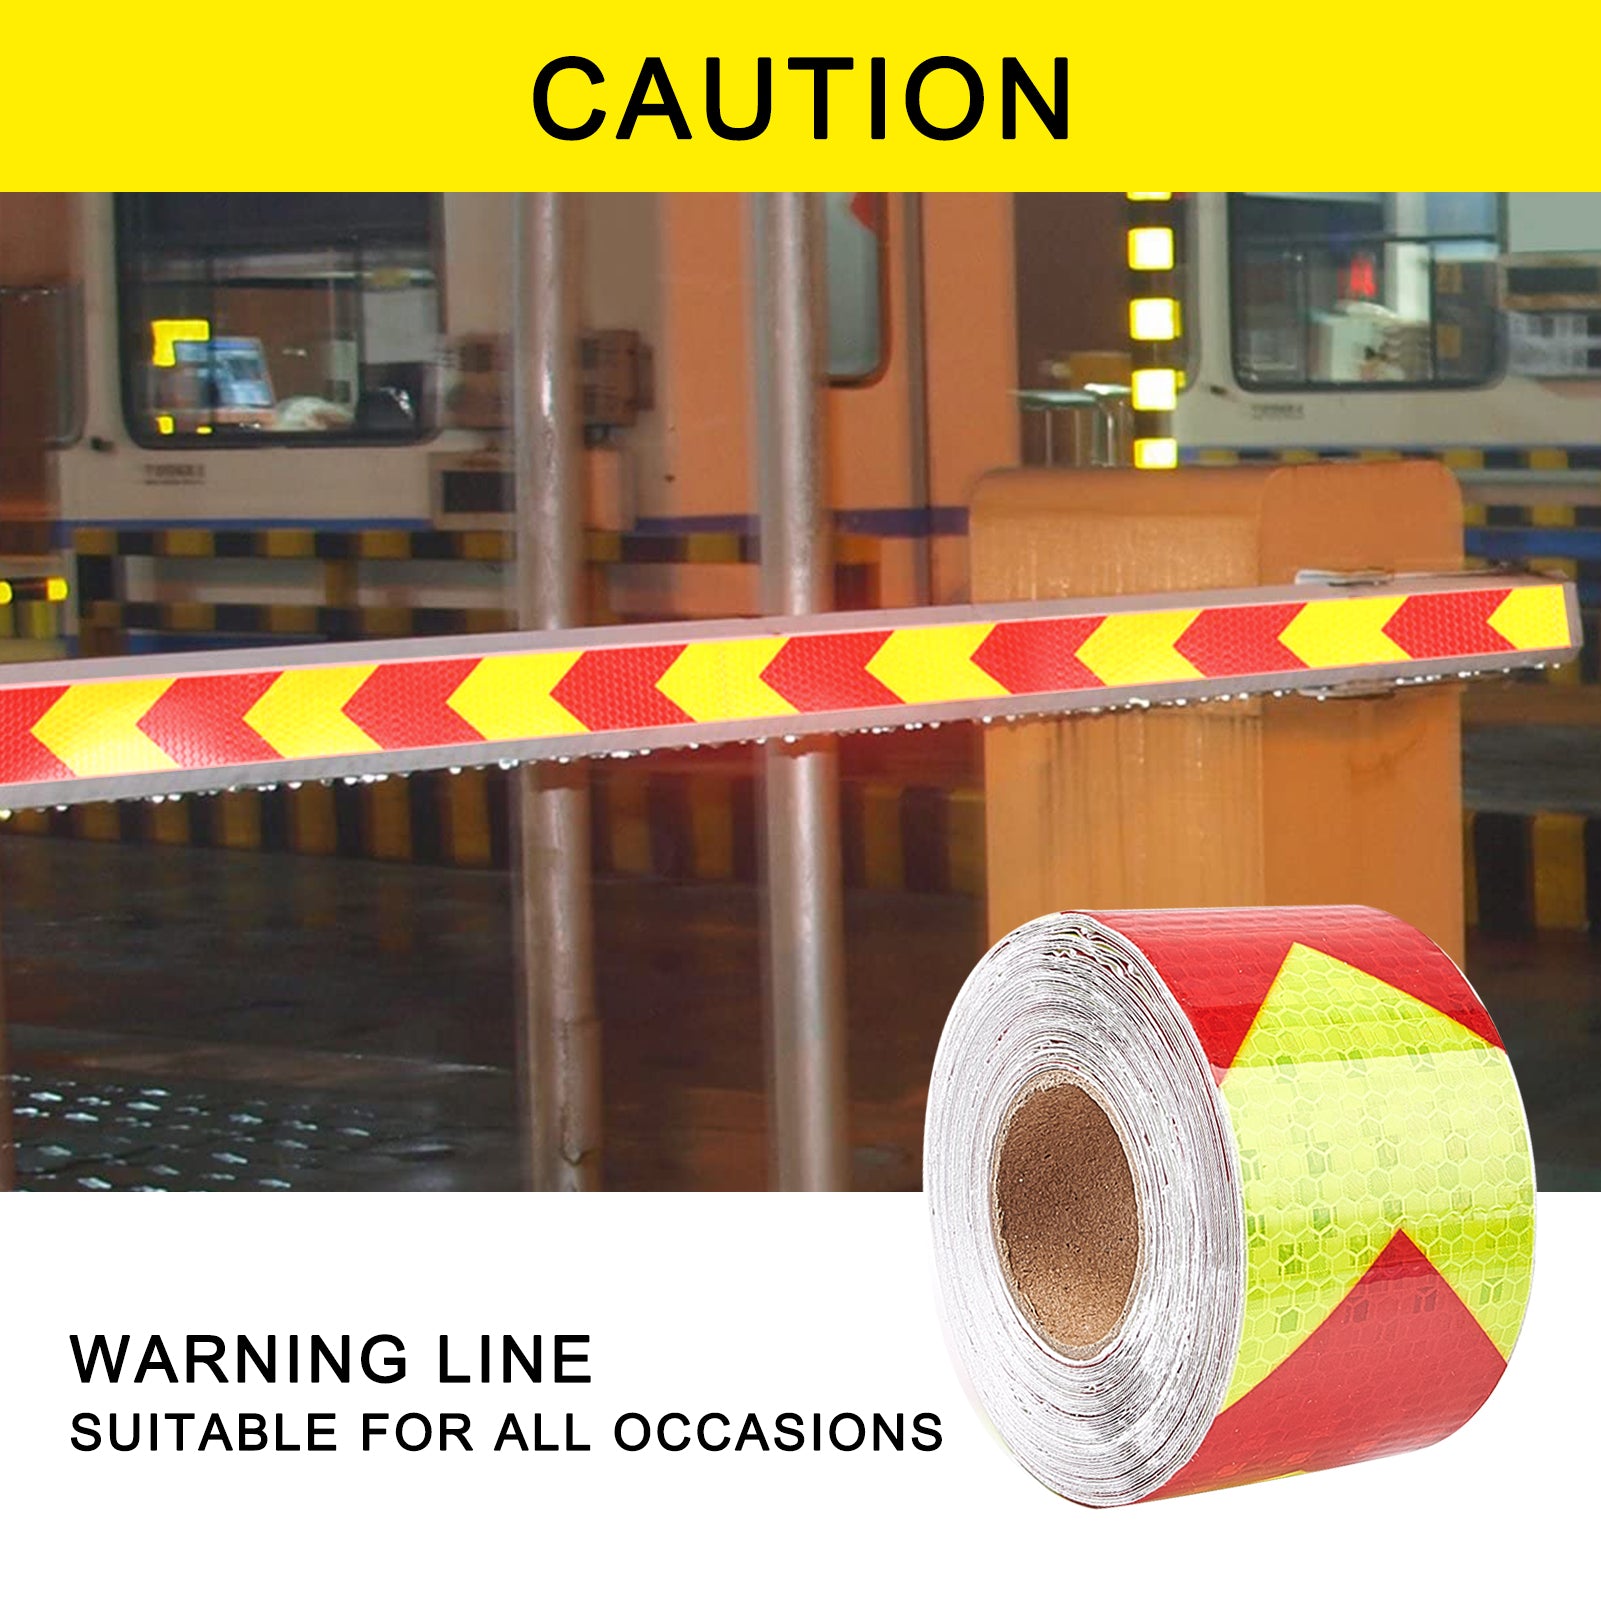 Globleland 2" X 33ft Reflective Hazard Warning Tape Yellow Red High Intensity Waterproof Reflector Safety Tape Marking Tape for Outdoor Steps, Red, 50mm, 10m/roll